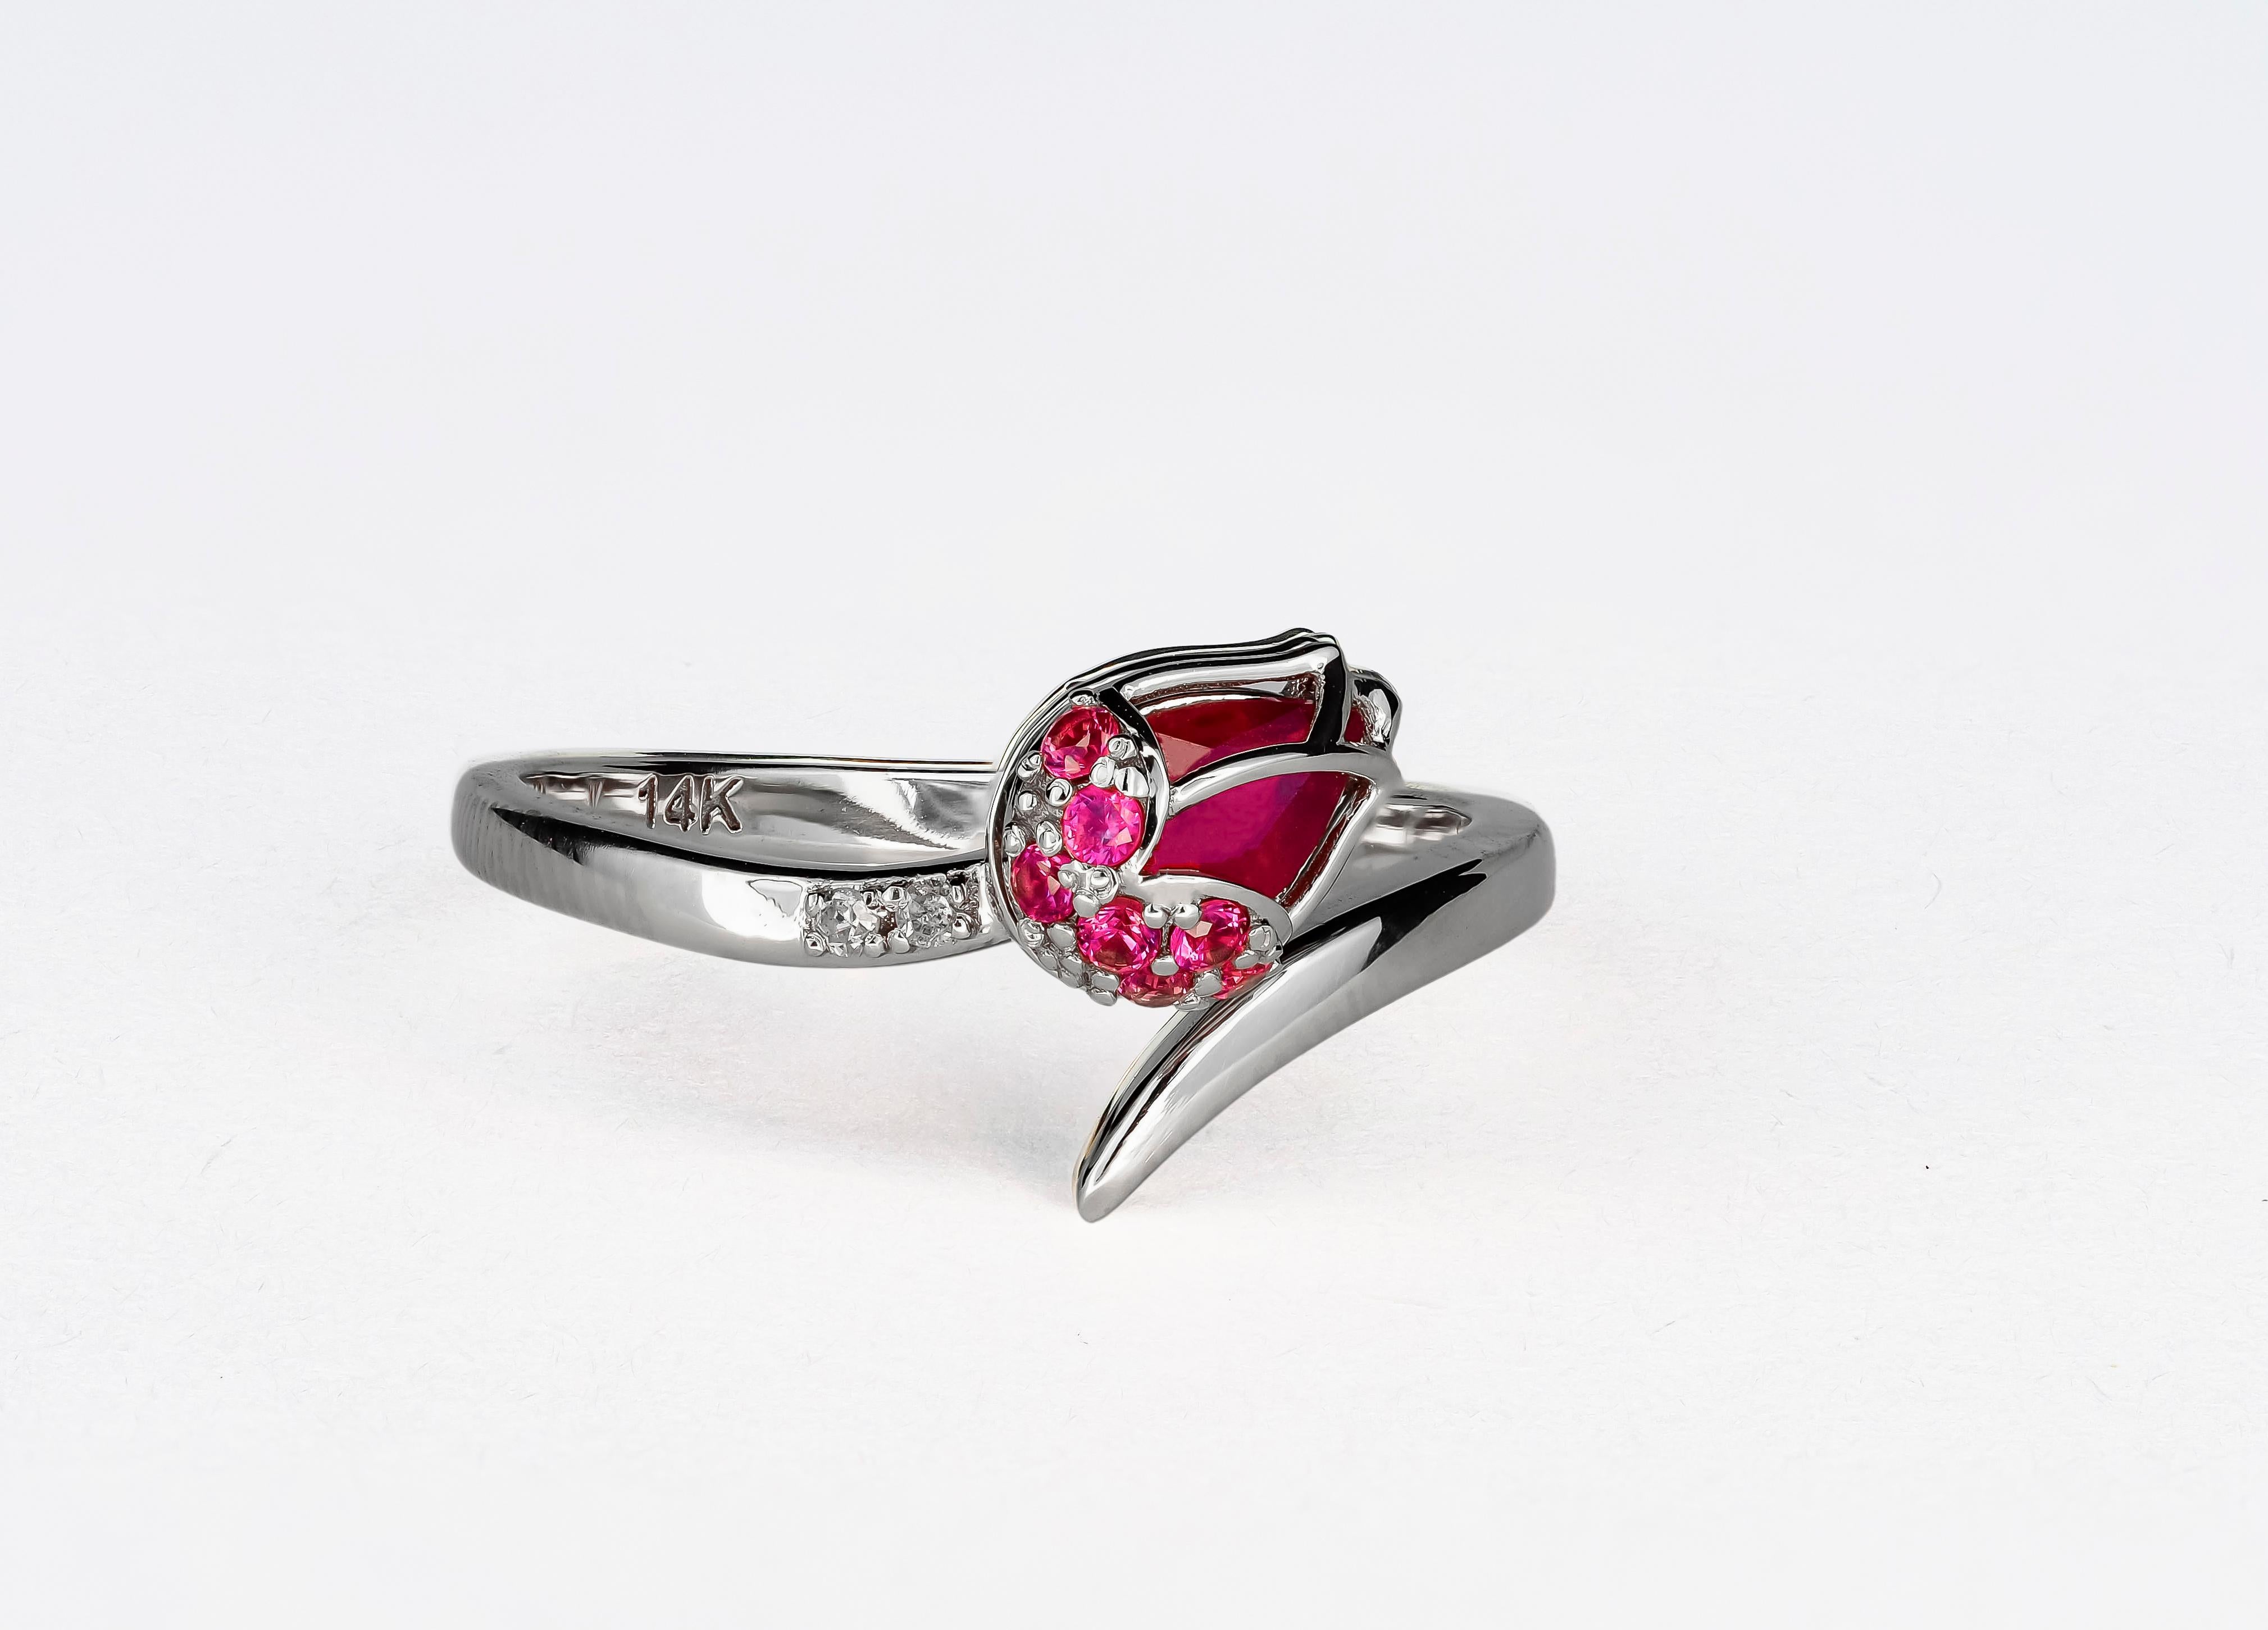 For Sale:  14 karat Gold Ring with Ruby. Gold tulip ring. July birthstone ruby ring 4